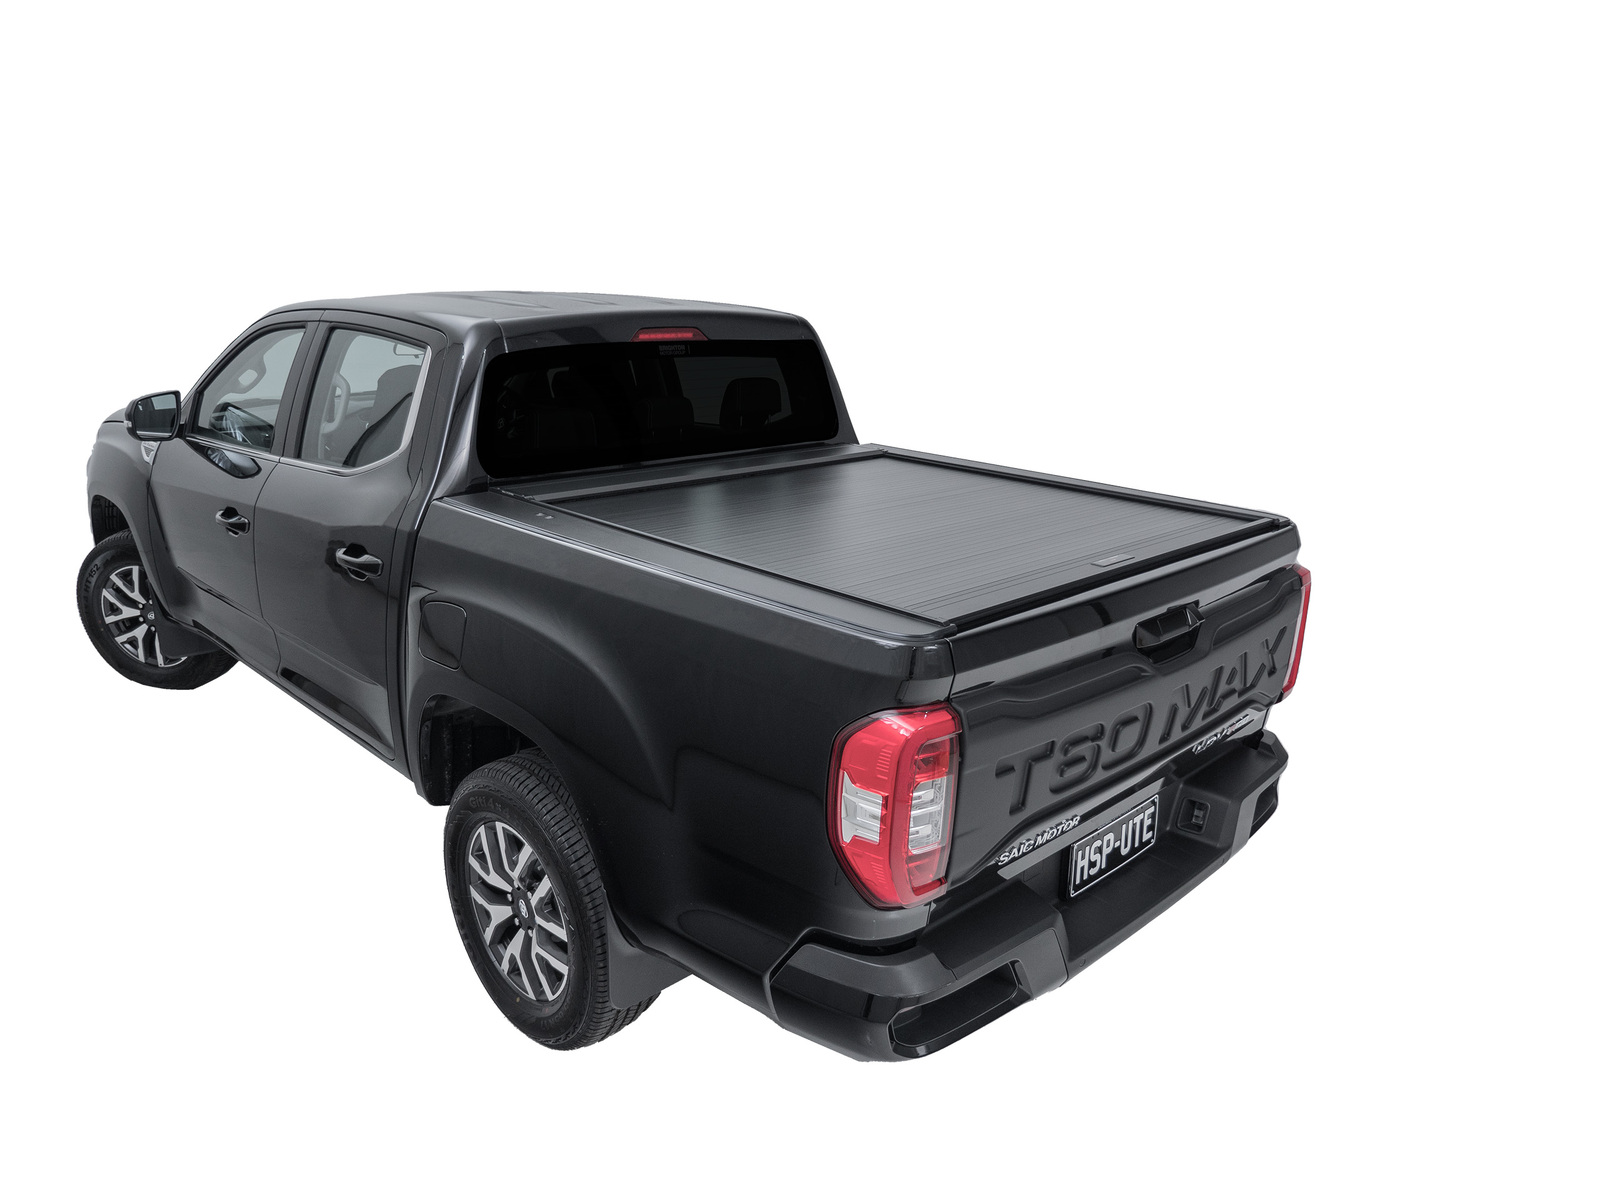 HSP ROLL R COVER SERIES 3.5 TO SUIT DUAL CAB LDV T60 W/OUT SPORTS BAR (2018-ON)